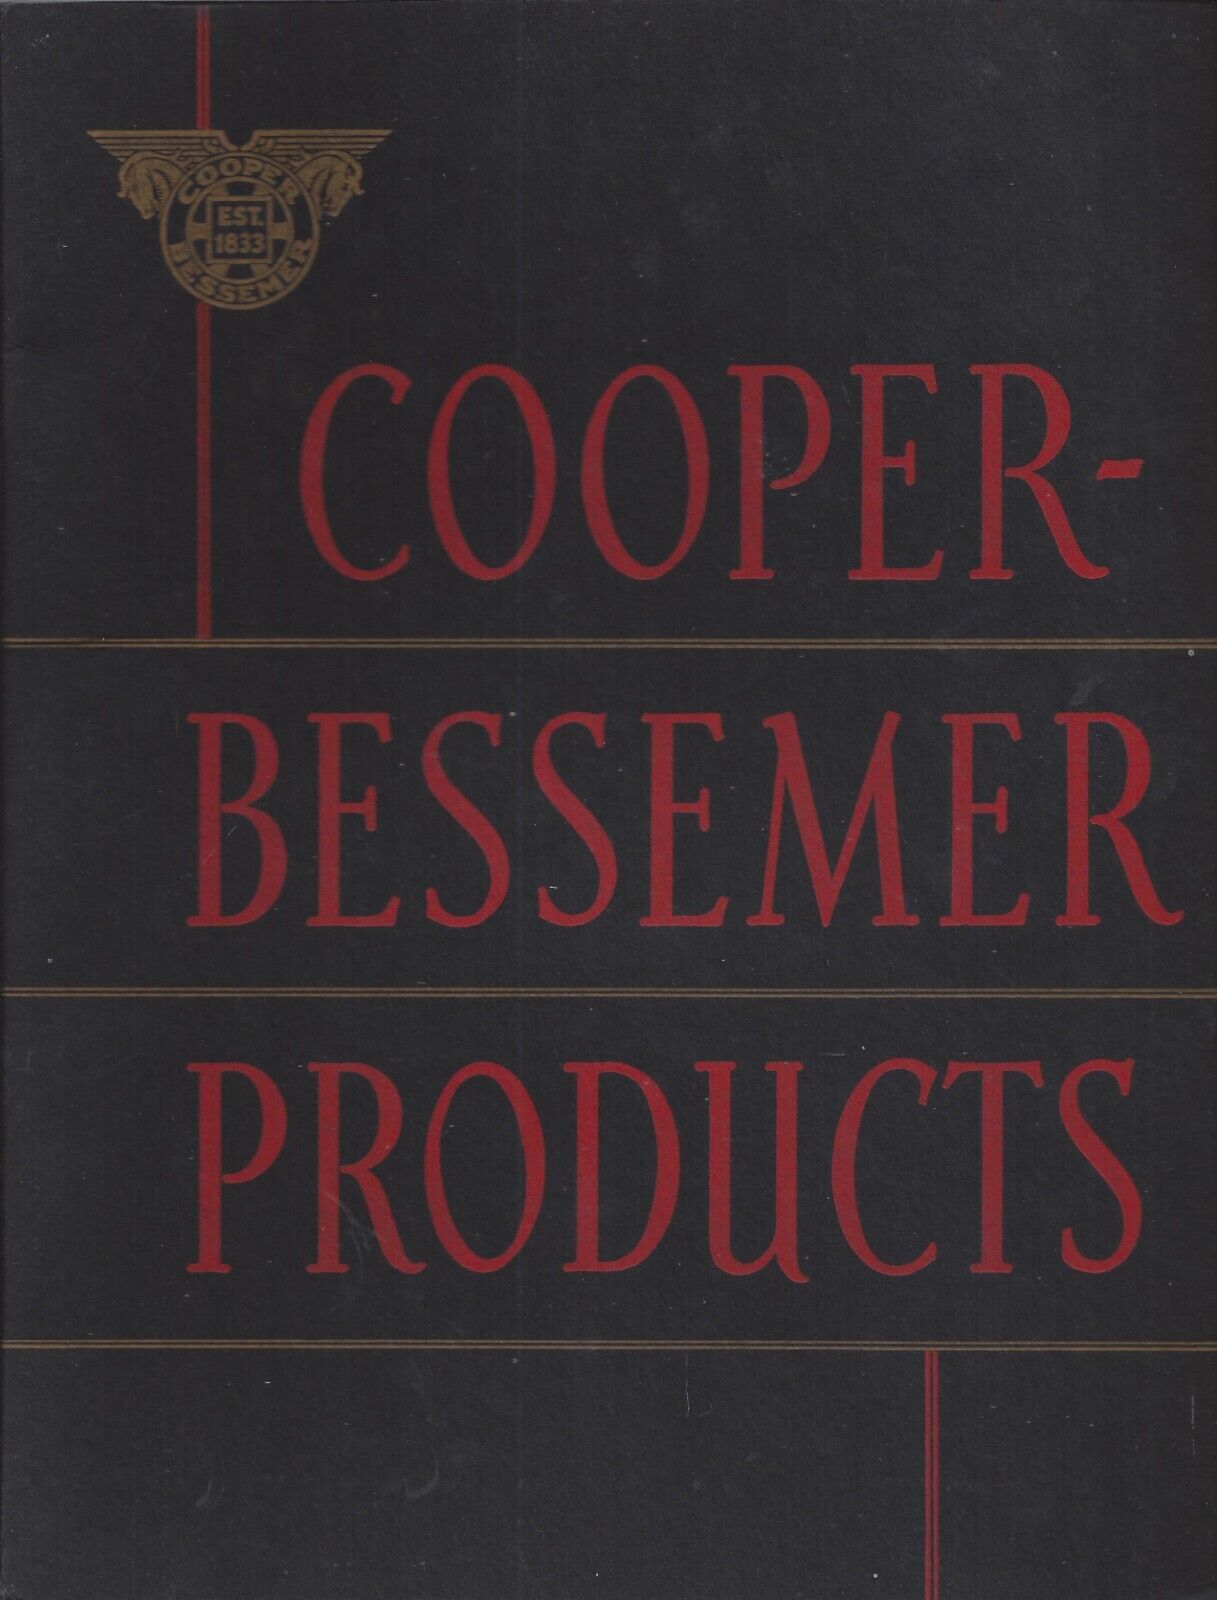 Vintage 1940's Ad Cooper Bessemer Products